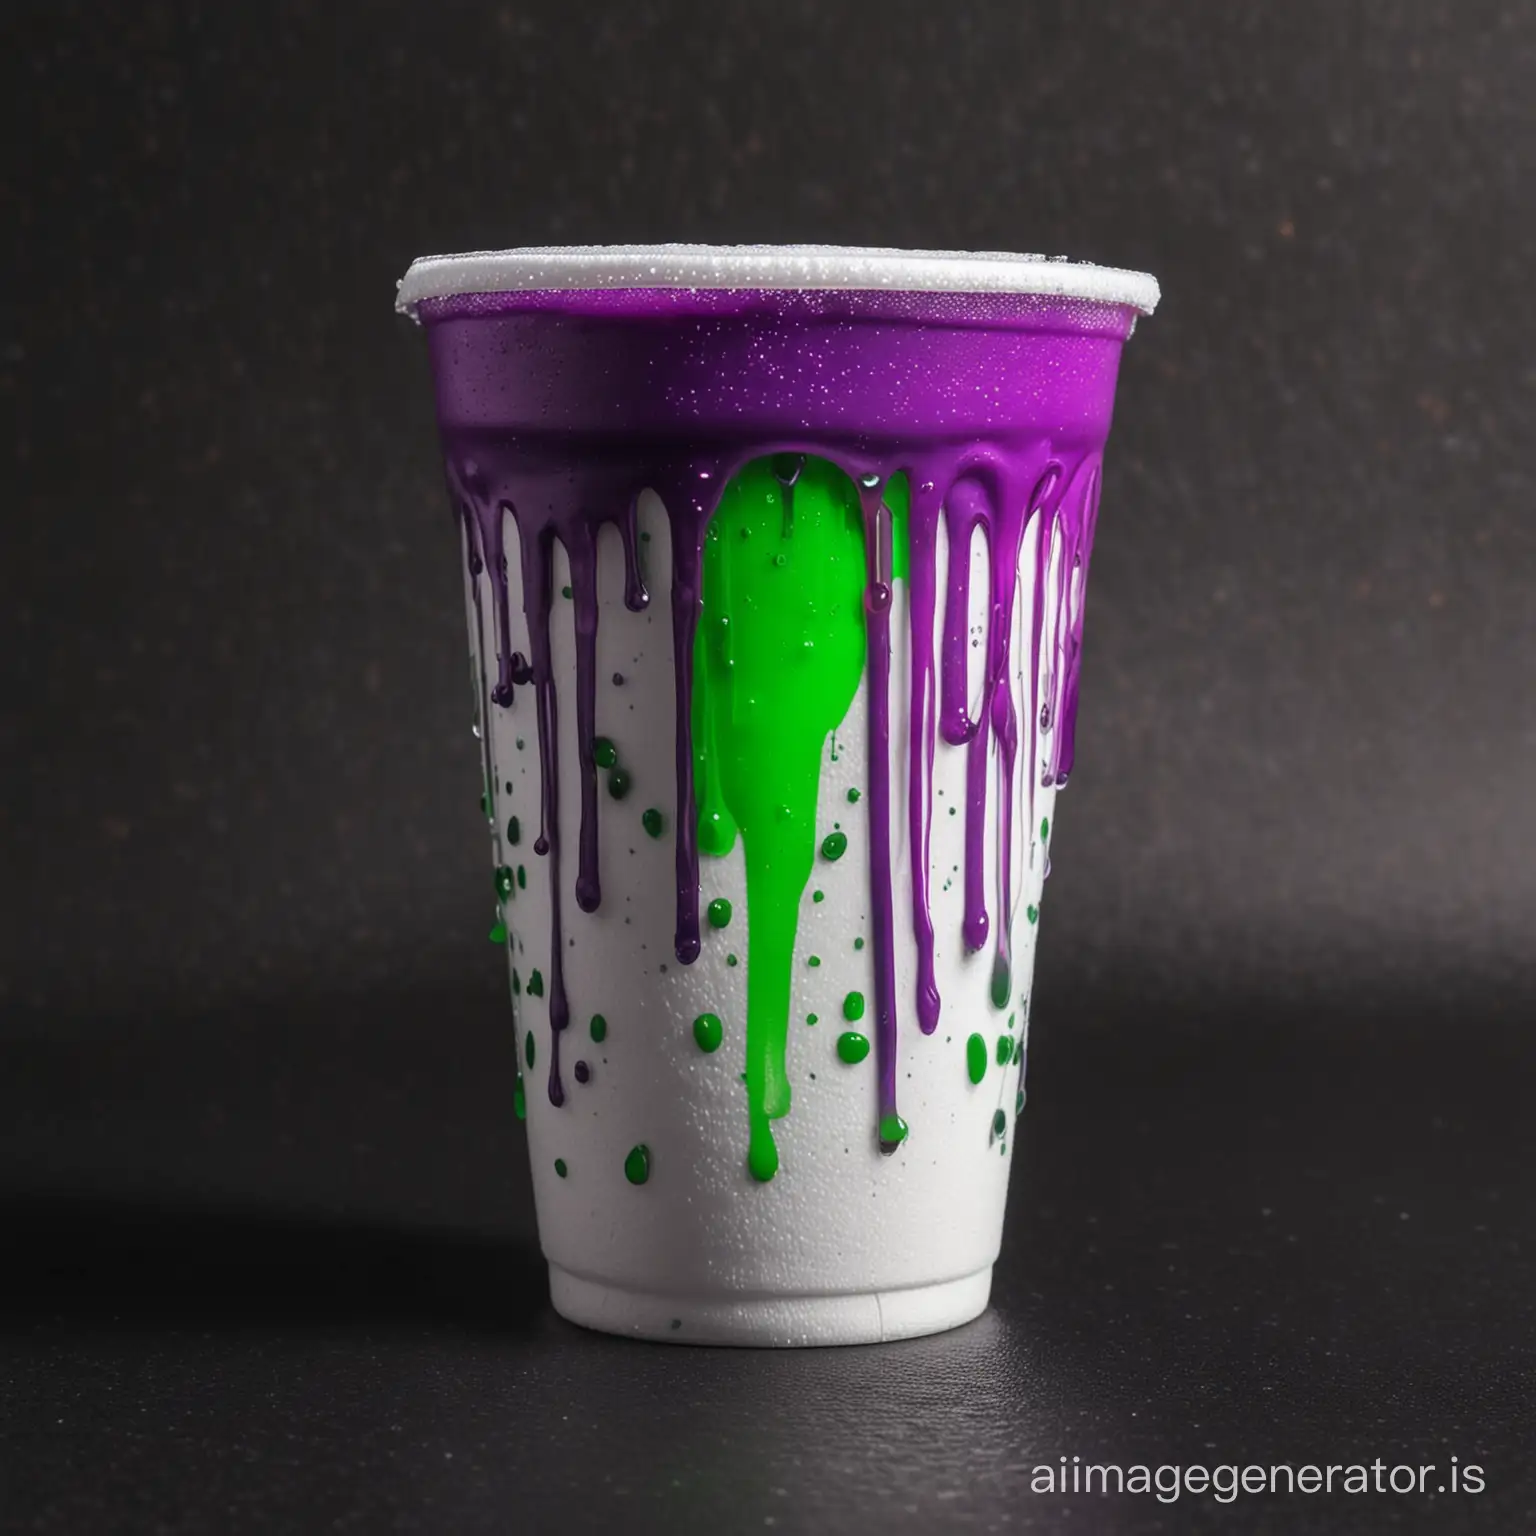 Neon-Green-and-Purple-Liquid-in-White-Styrofoam-Cup-on-Black-Background